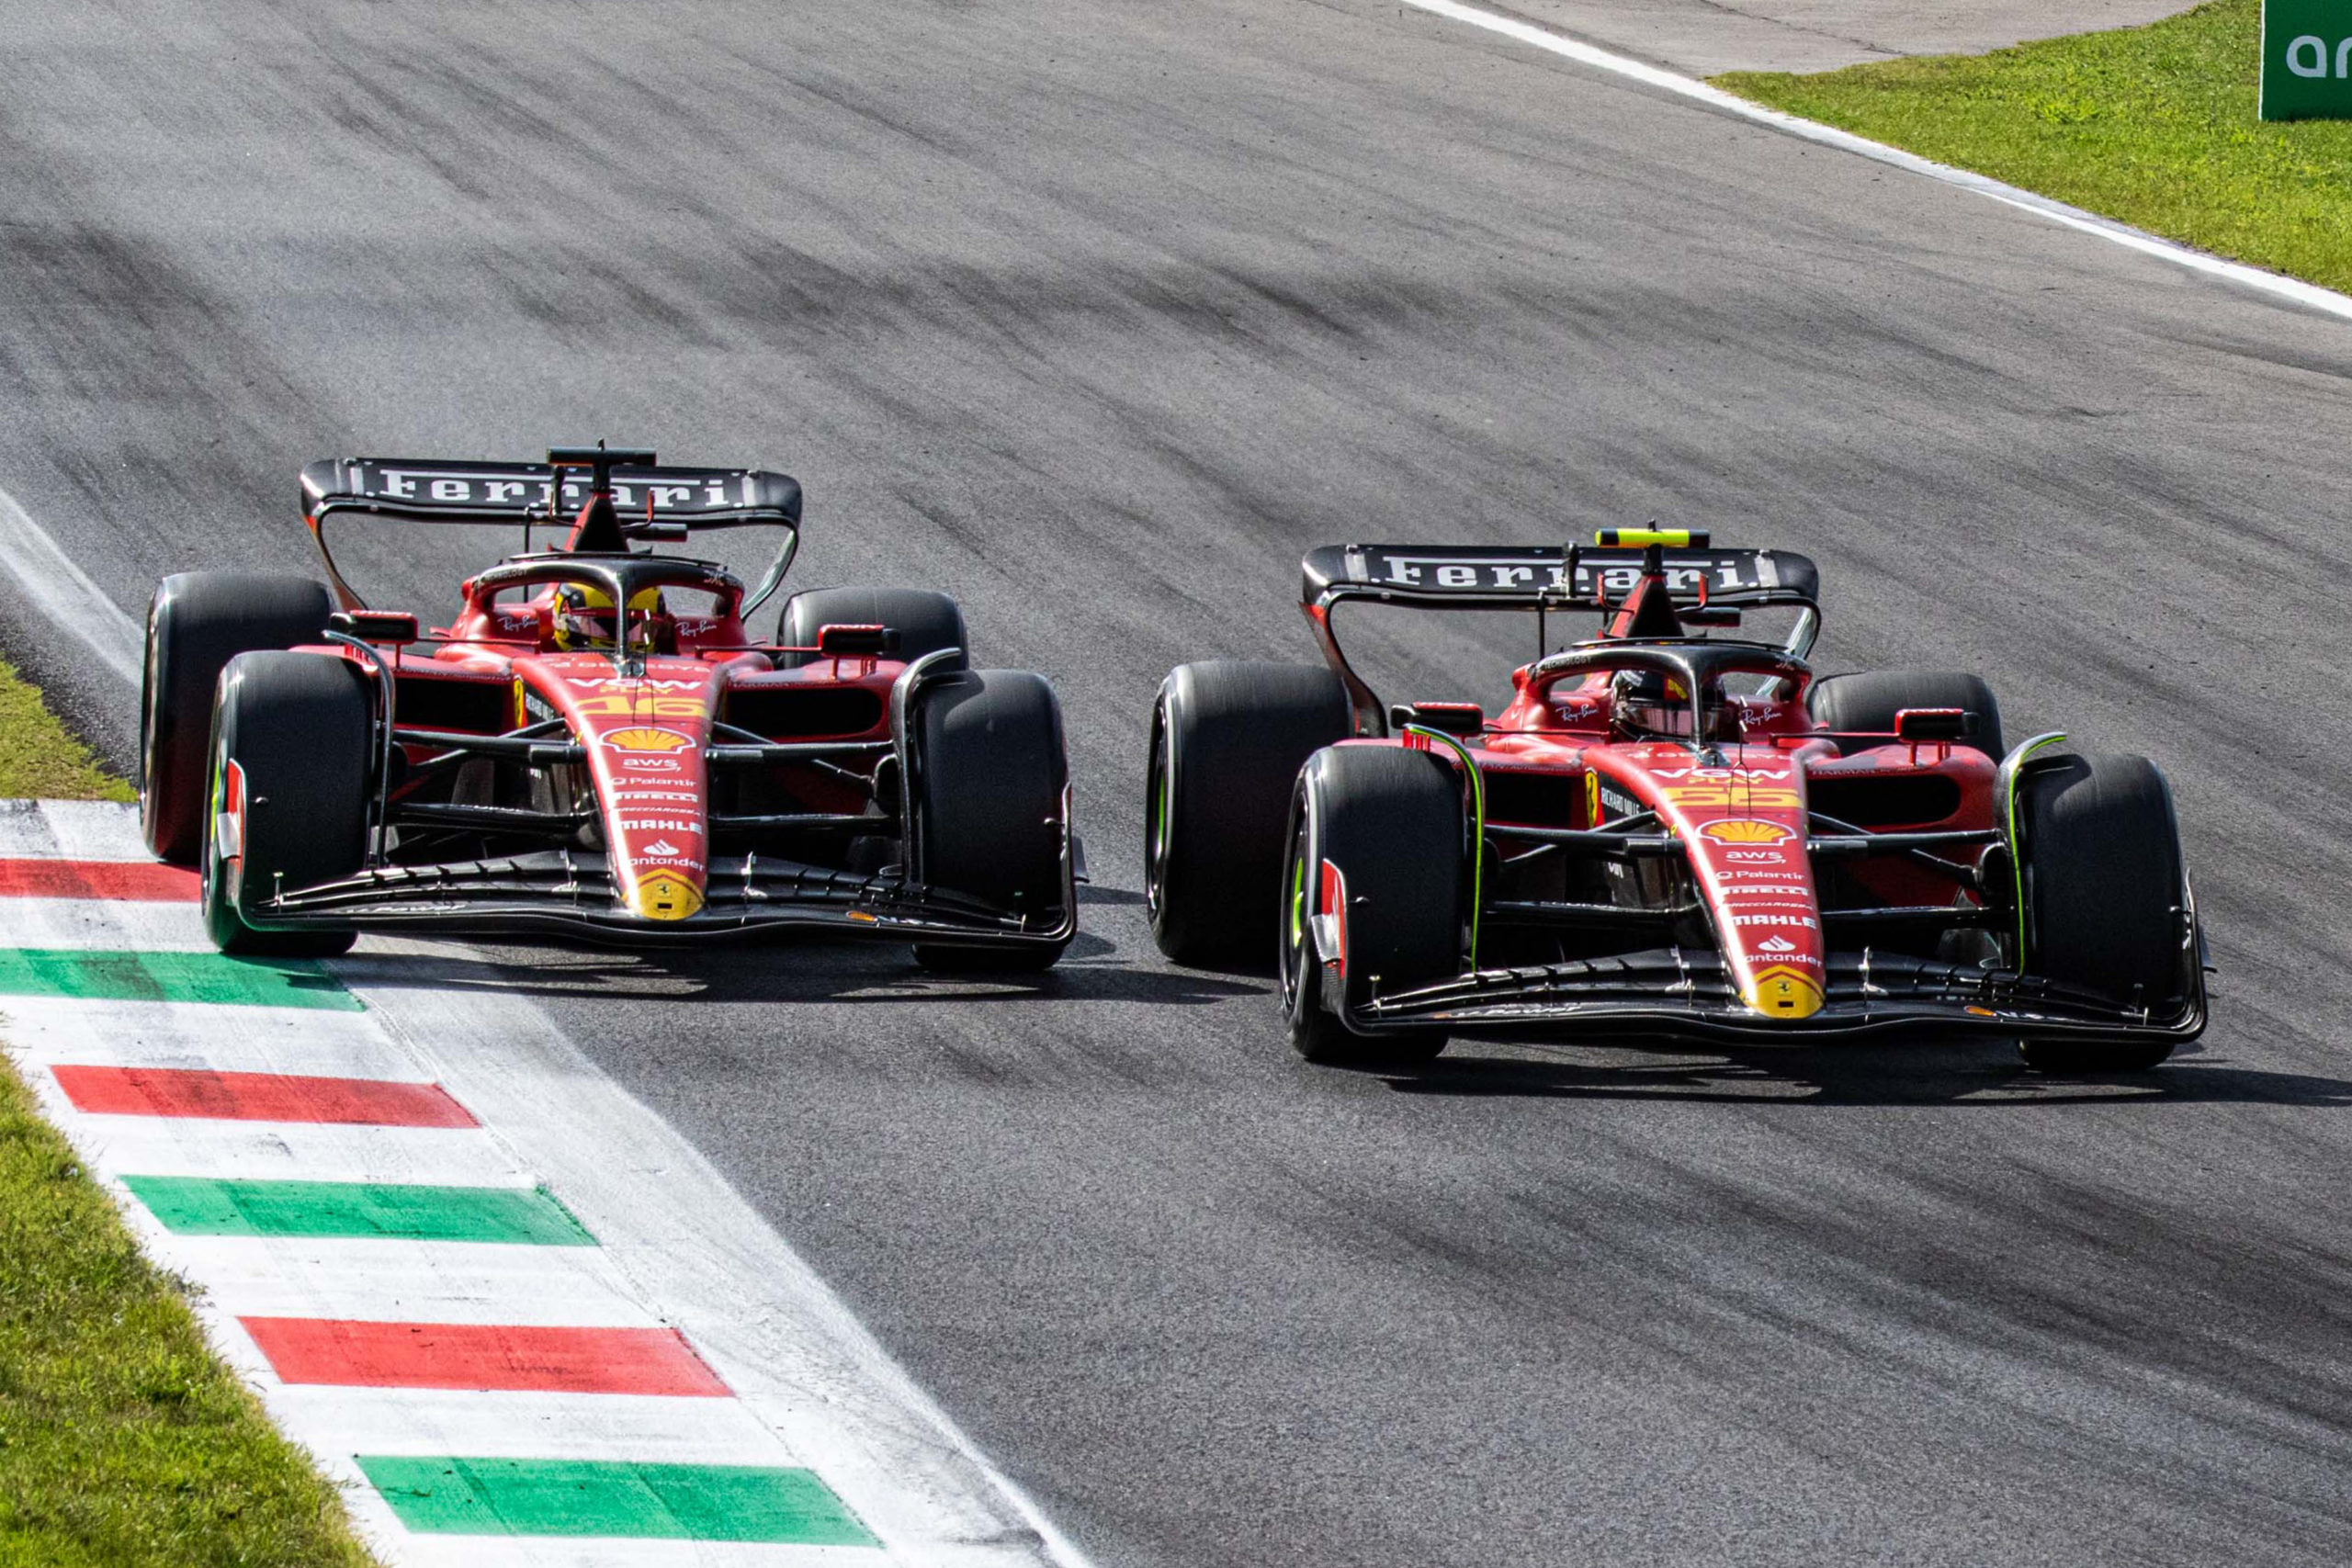 what will change after ferrari’s brilliant ‘no risk’ near-disaster